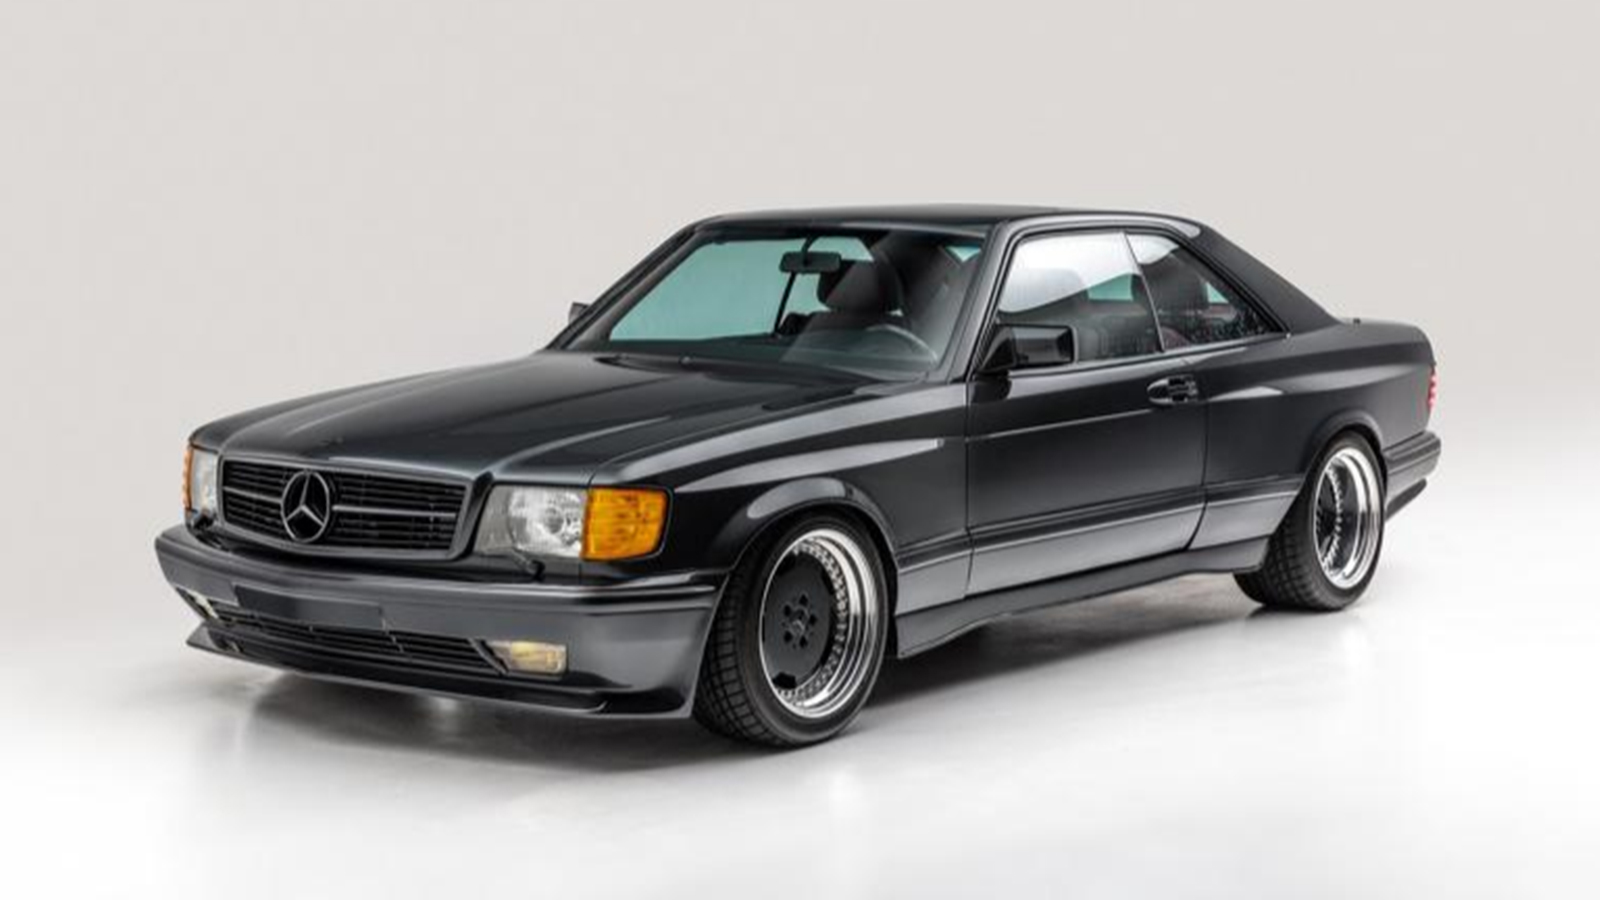 1989 Mercedes-Benz 560 SEC “Wide Body” Coupe